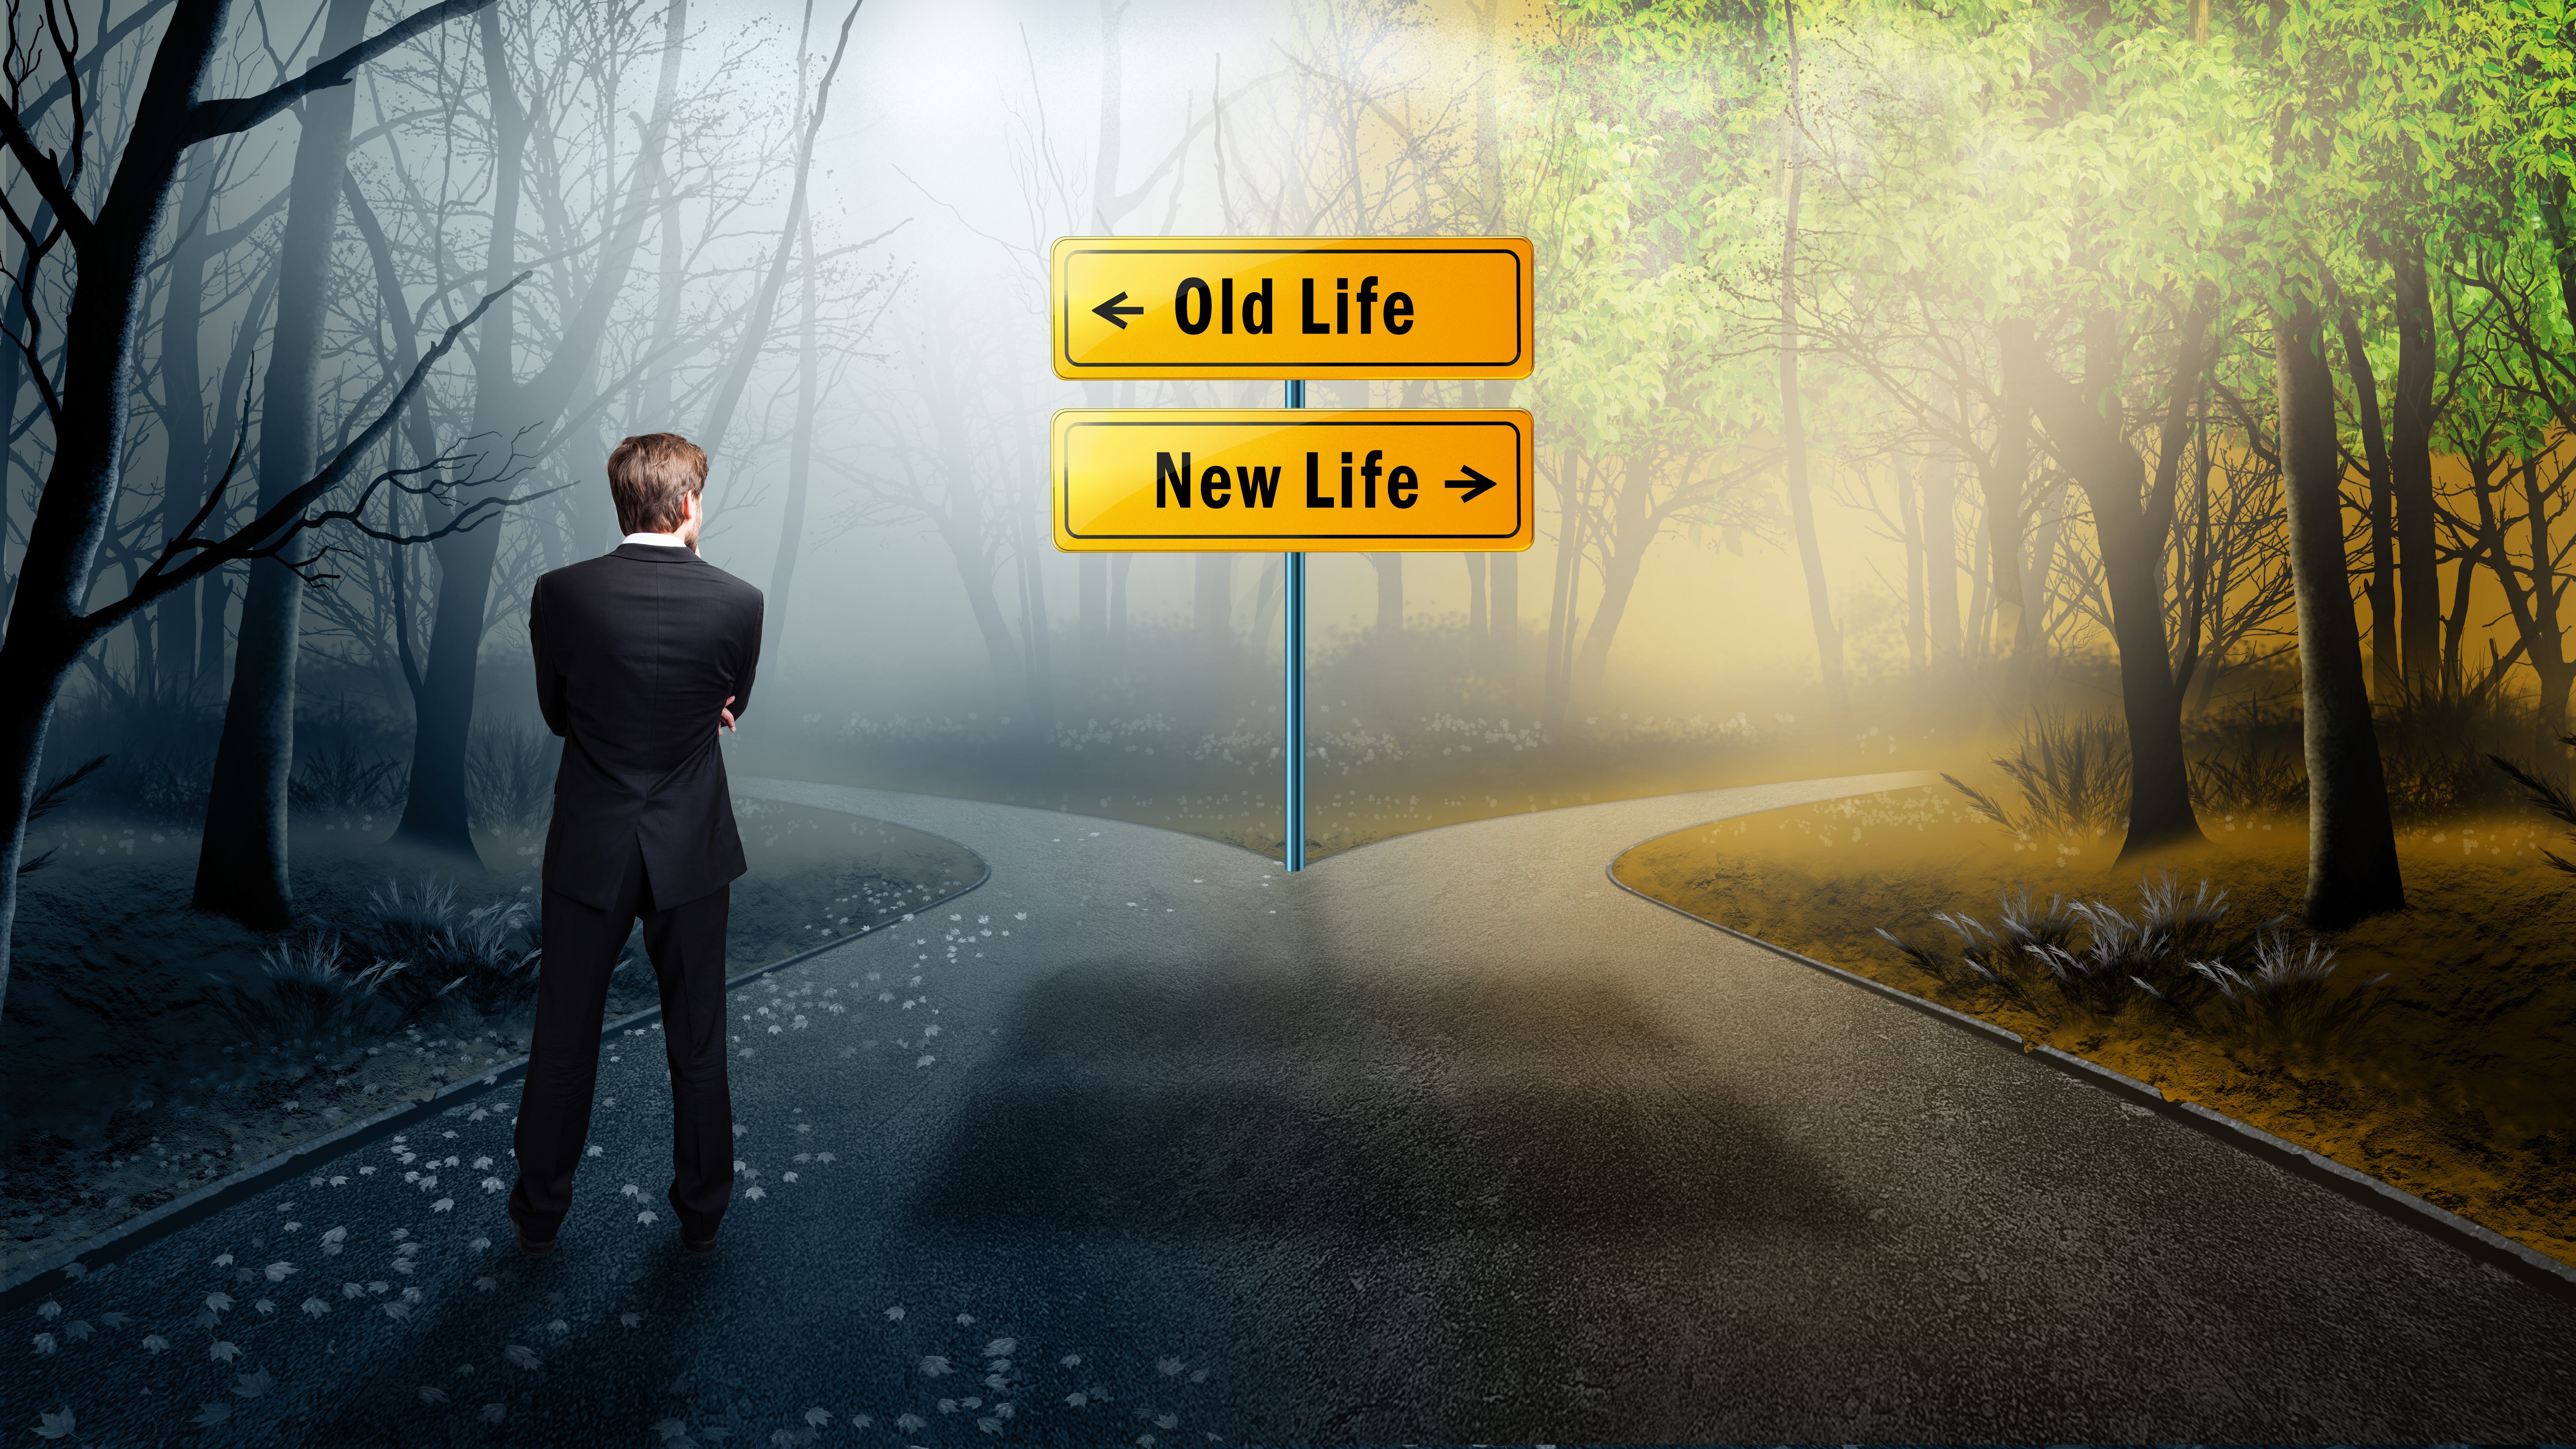 New life have you. New Life картинки. Проект New-Life. Crossroad картинка. Old Life.